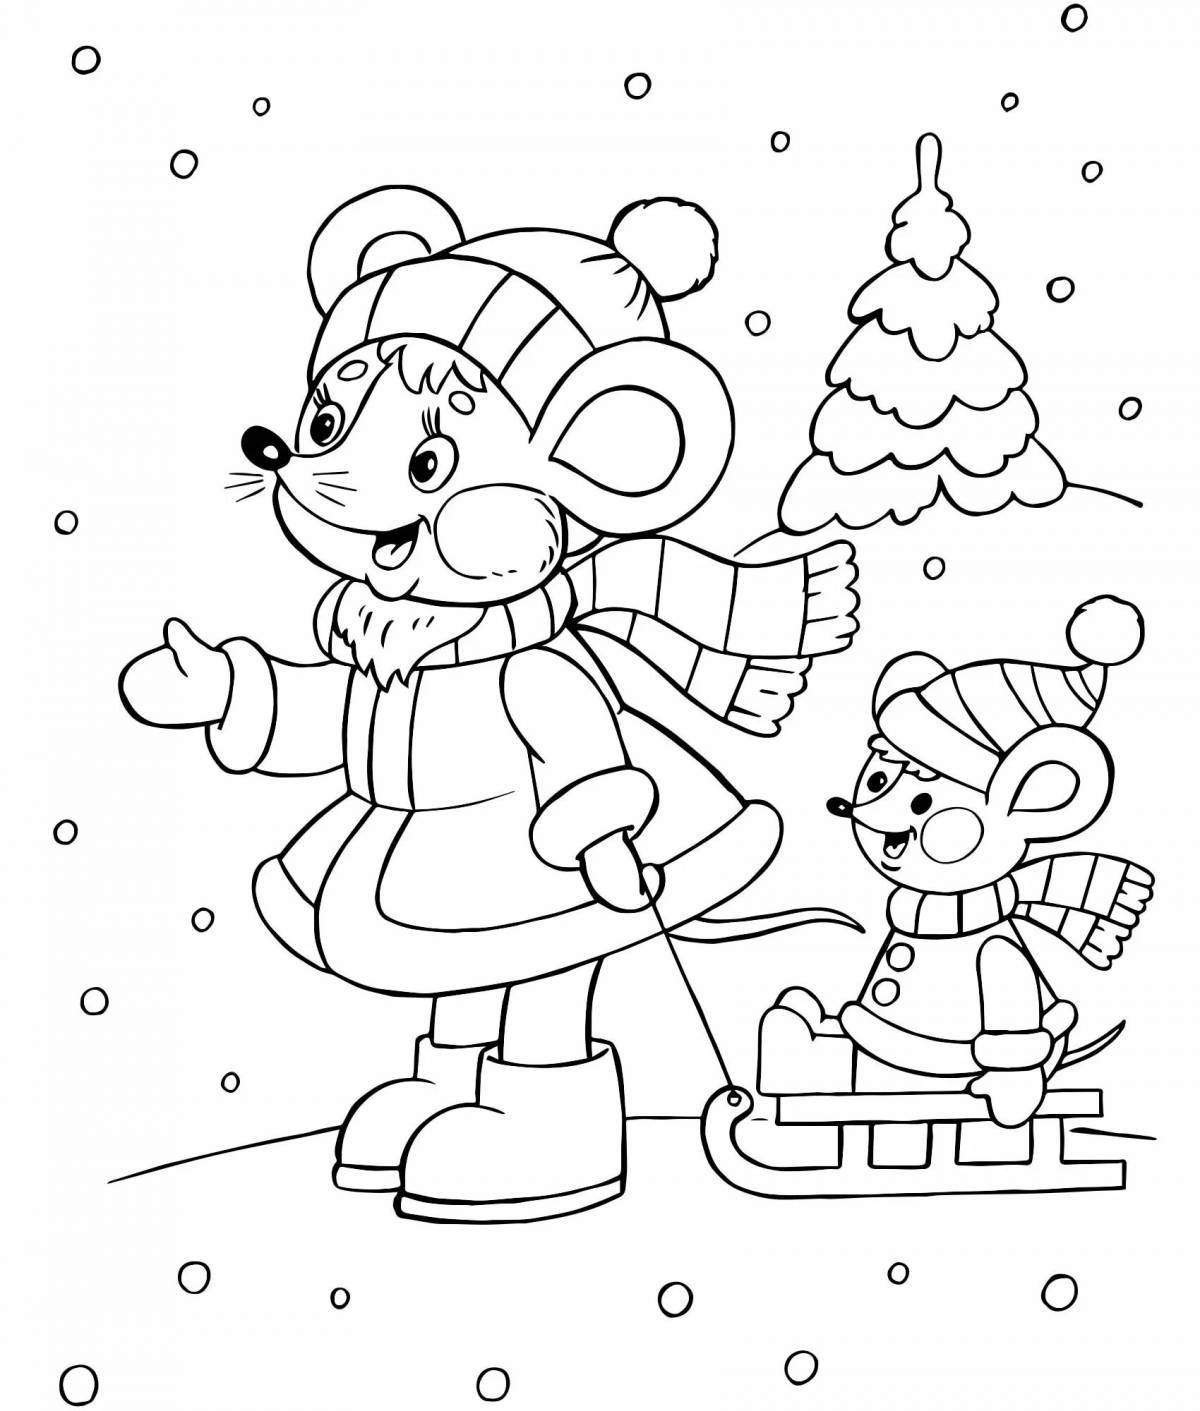 Glowing winter coloring book